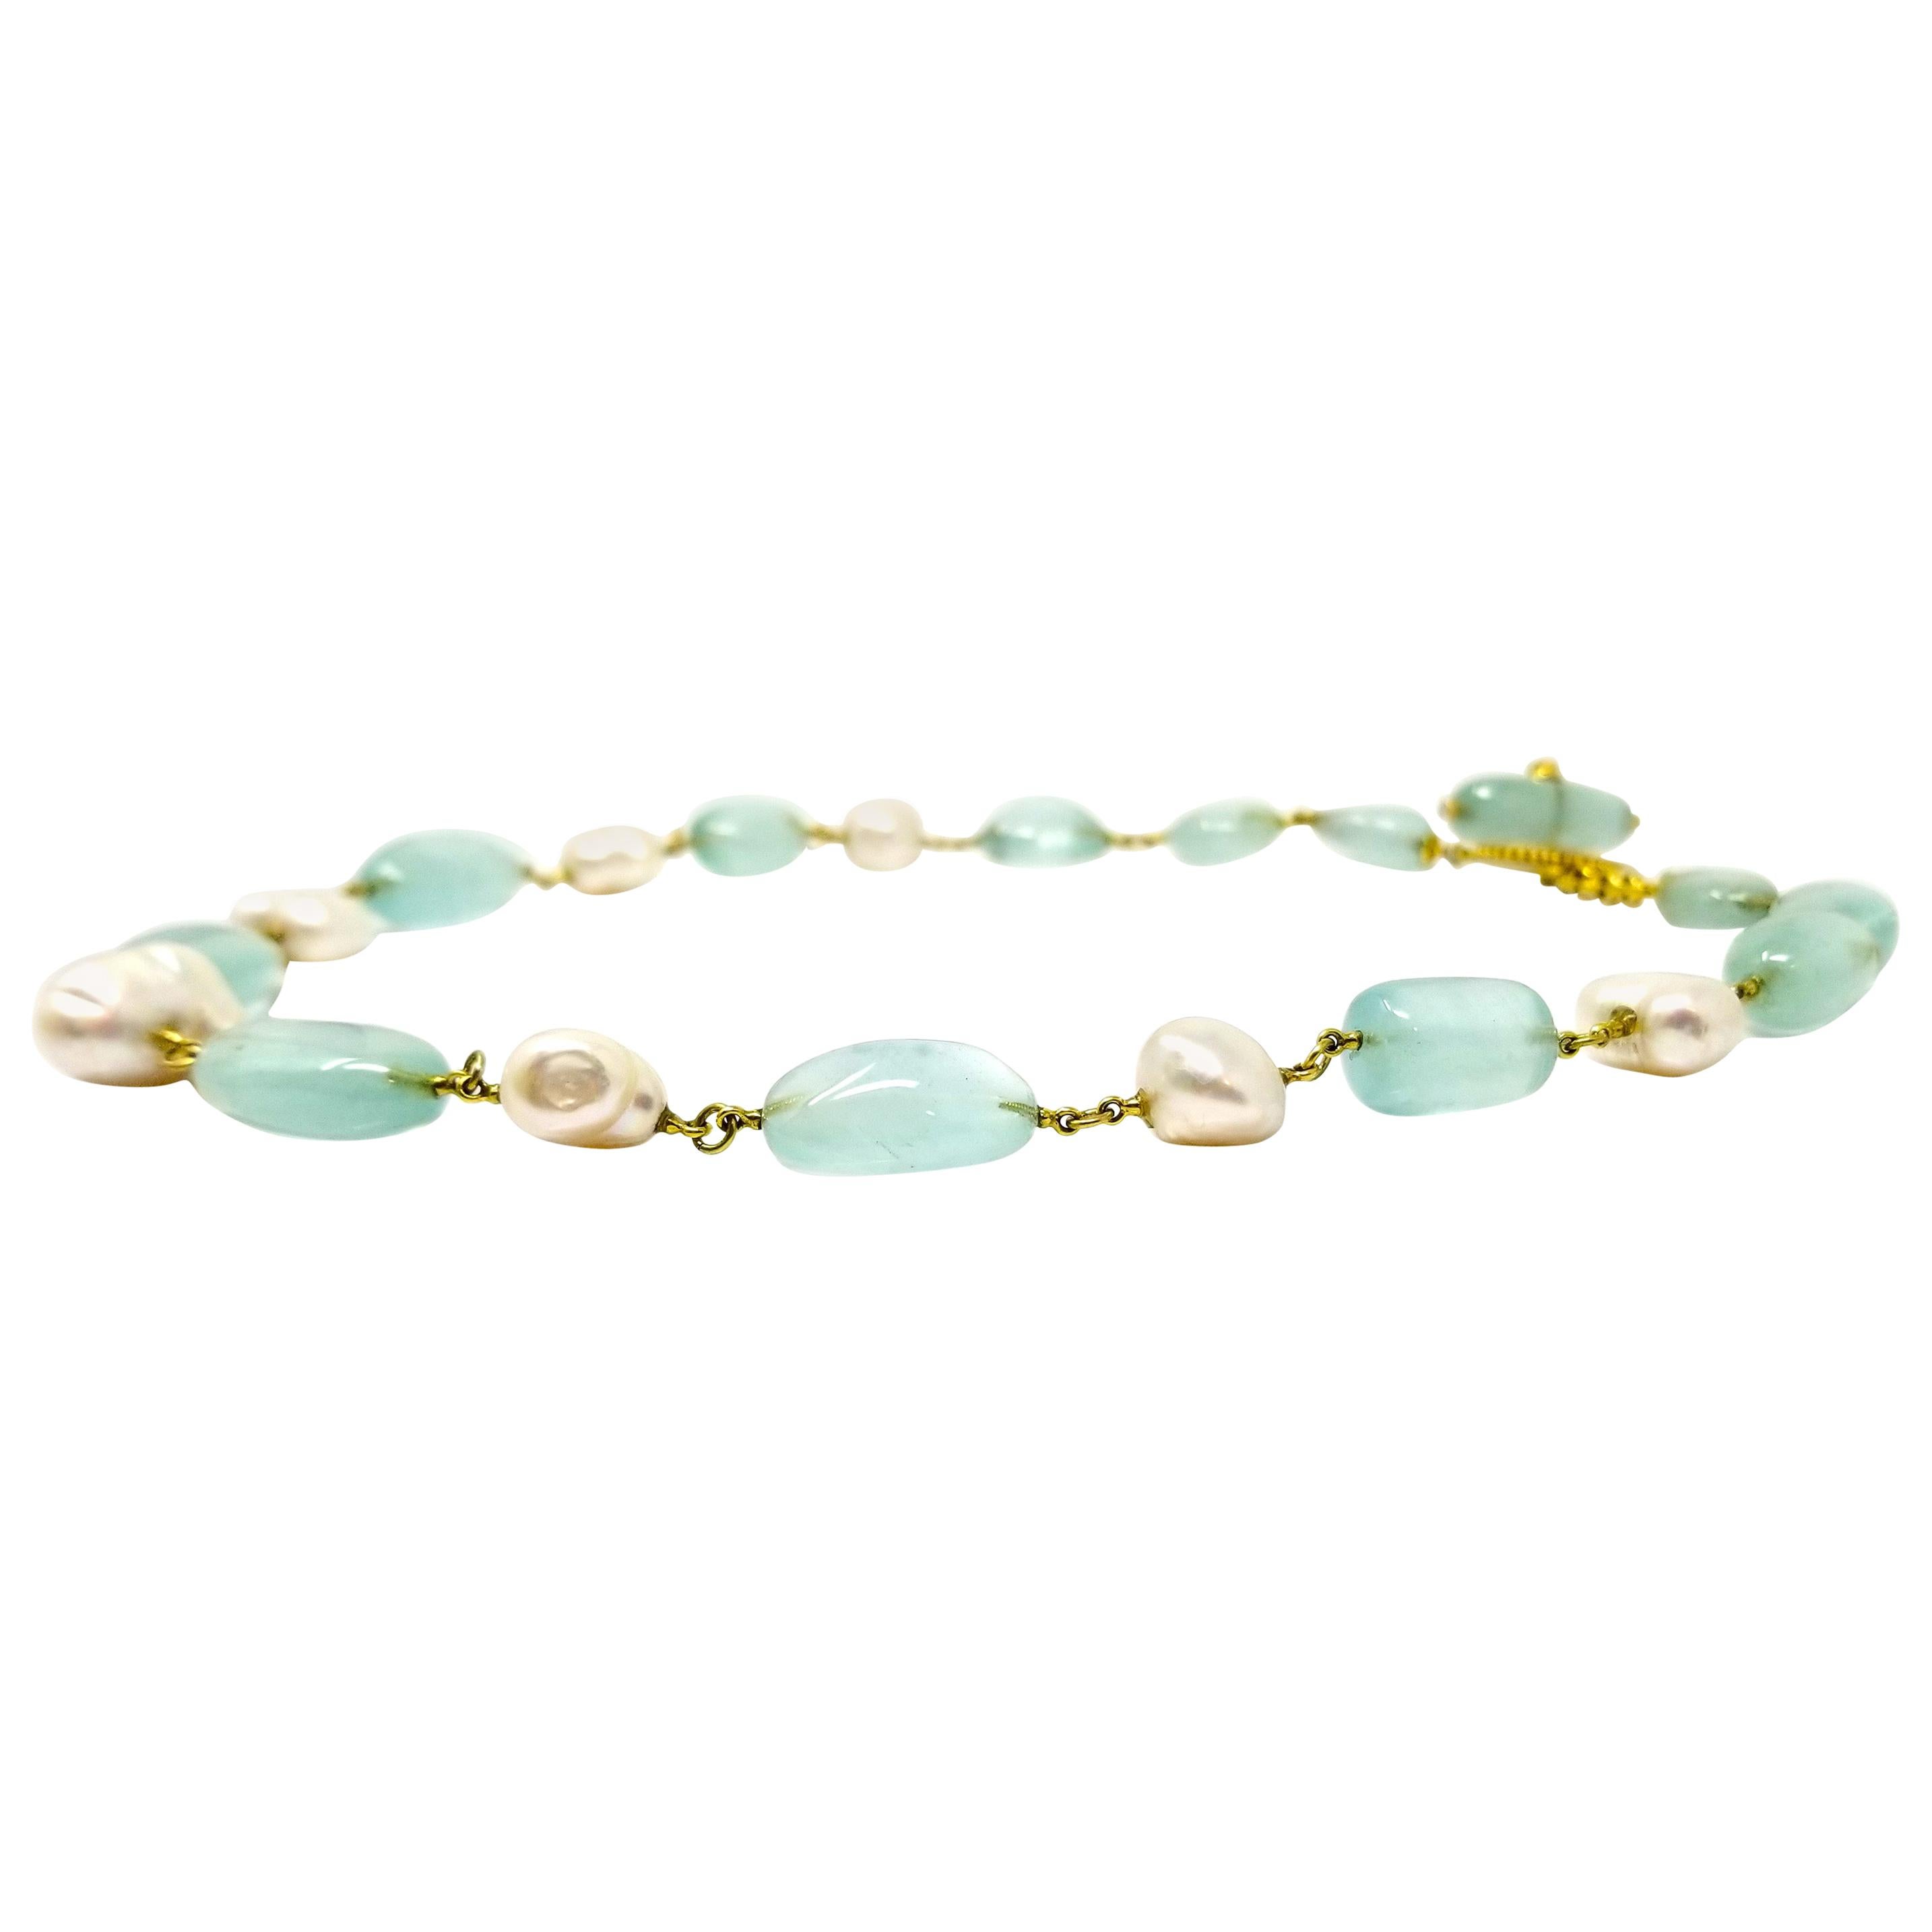 Aquamarine, Baroque Pearl, and 18kt Beaded and Linked Necklace by Dan Peligrad